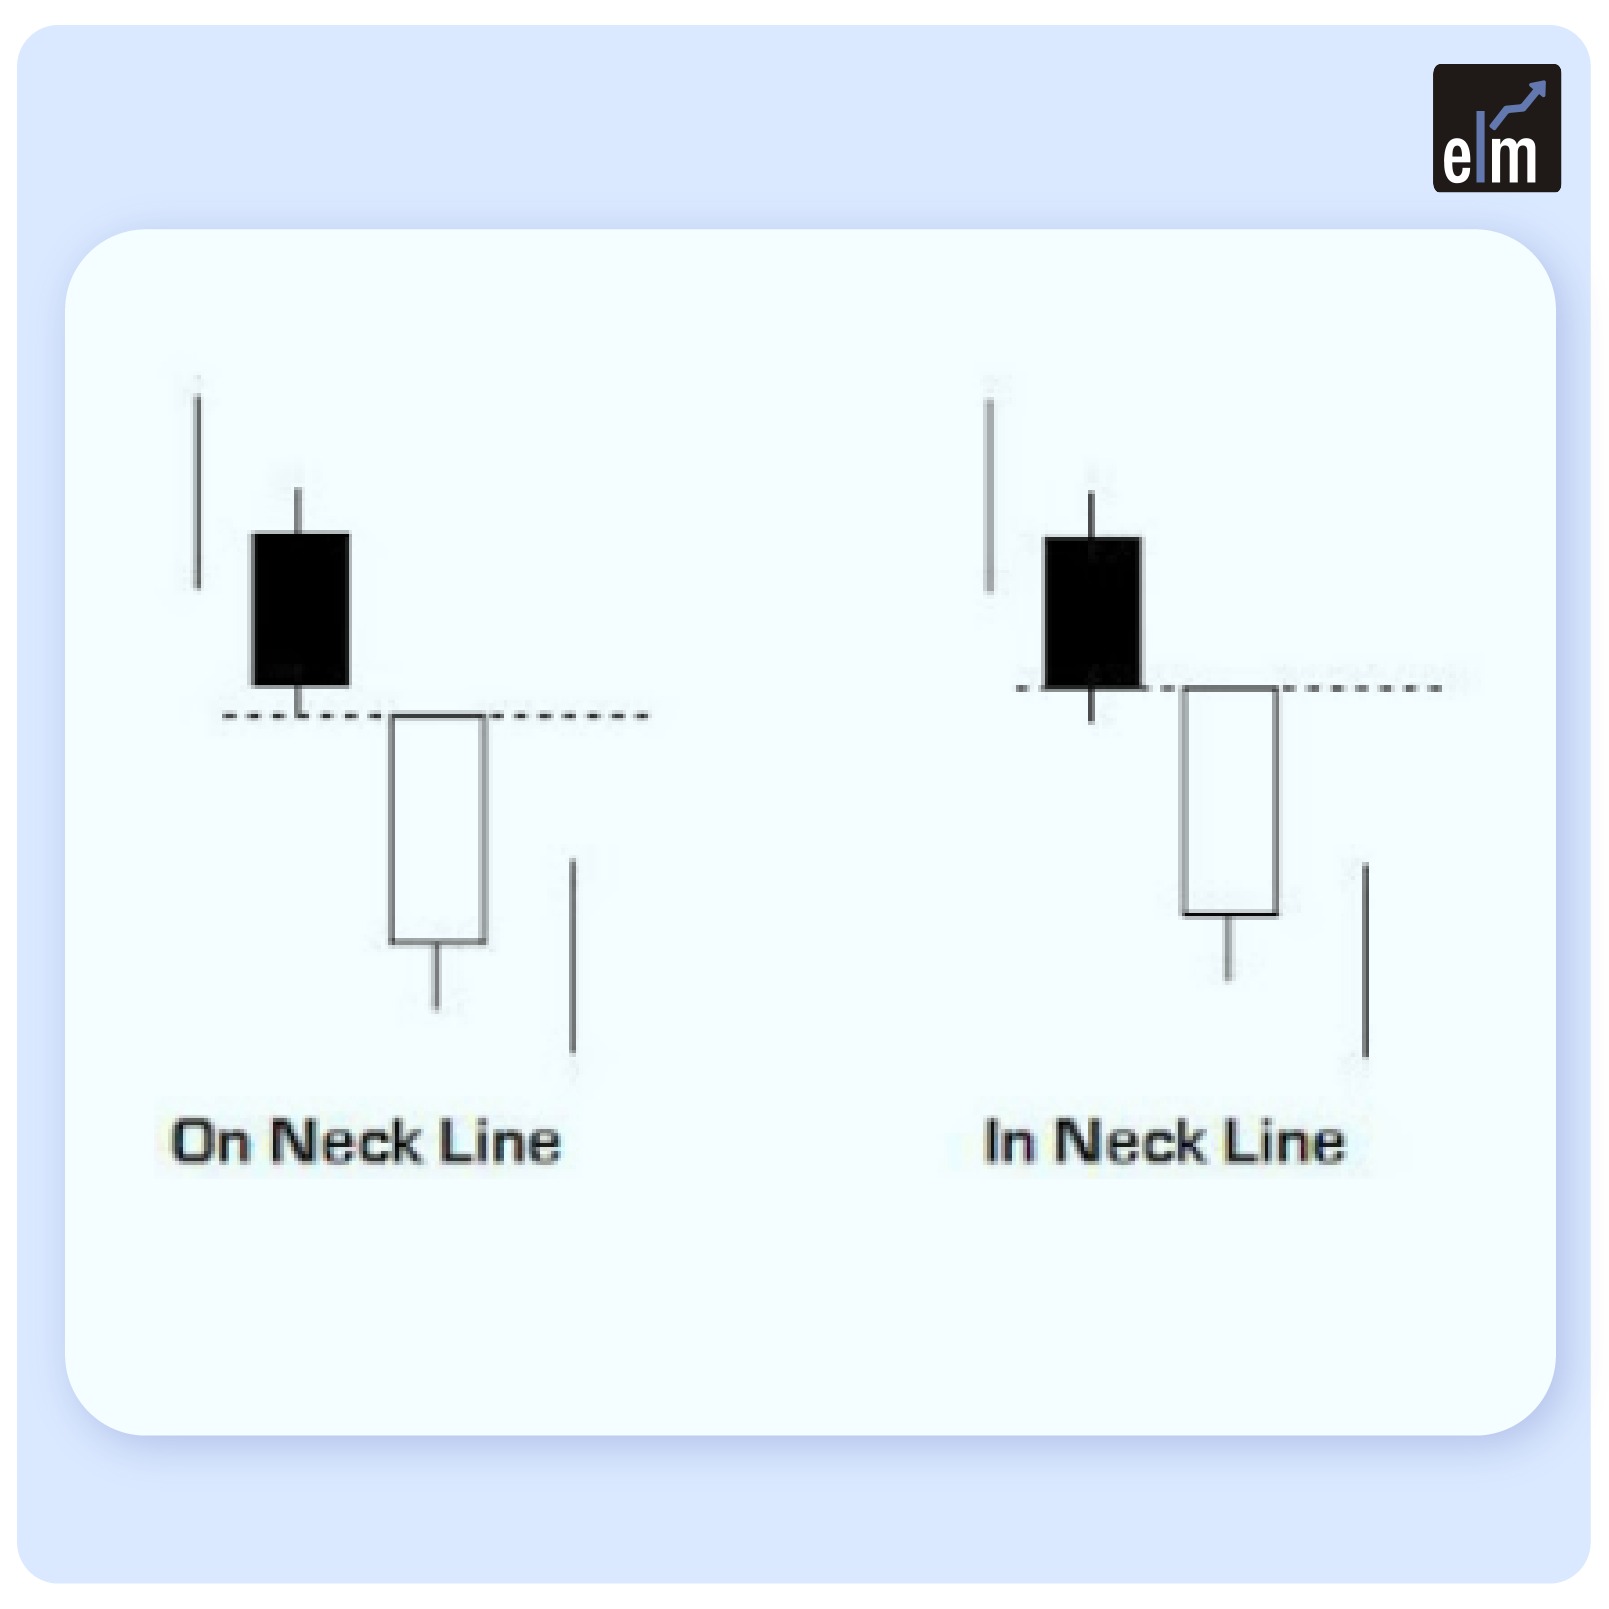 On-Neck and In-Neck Candlestick patterns